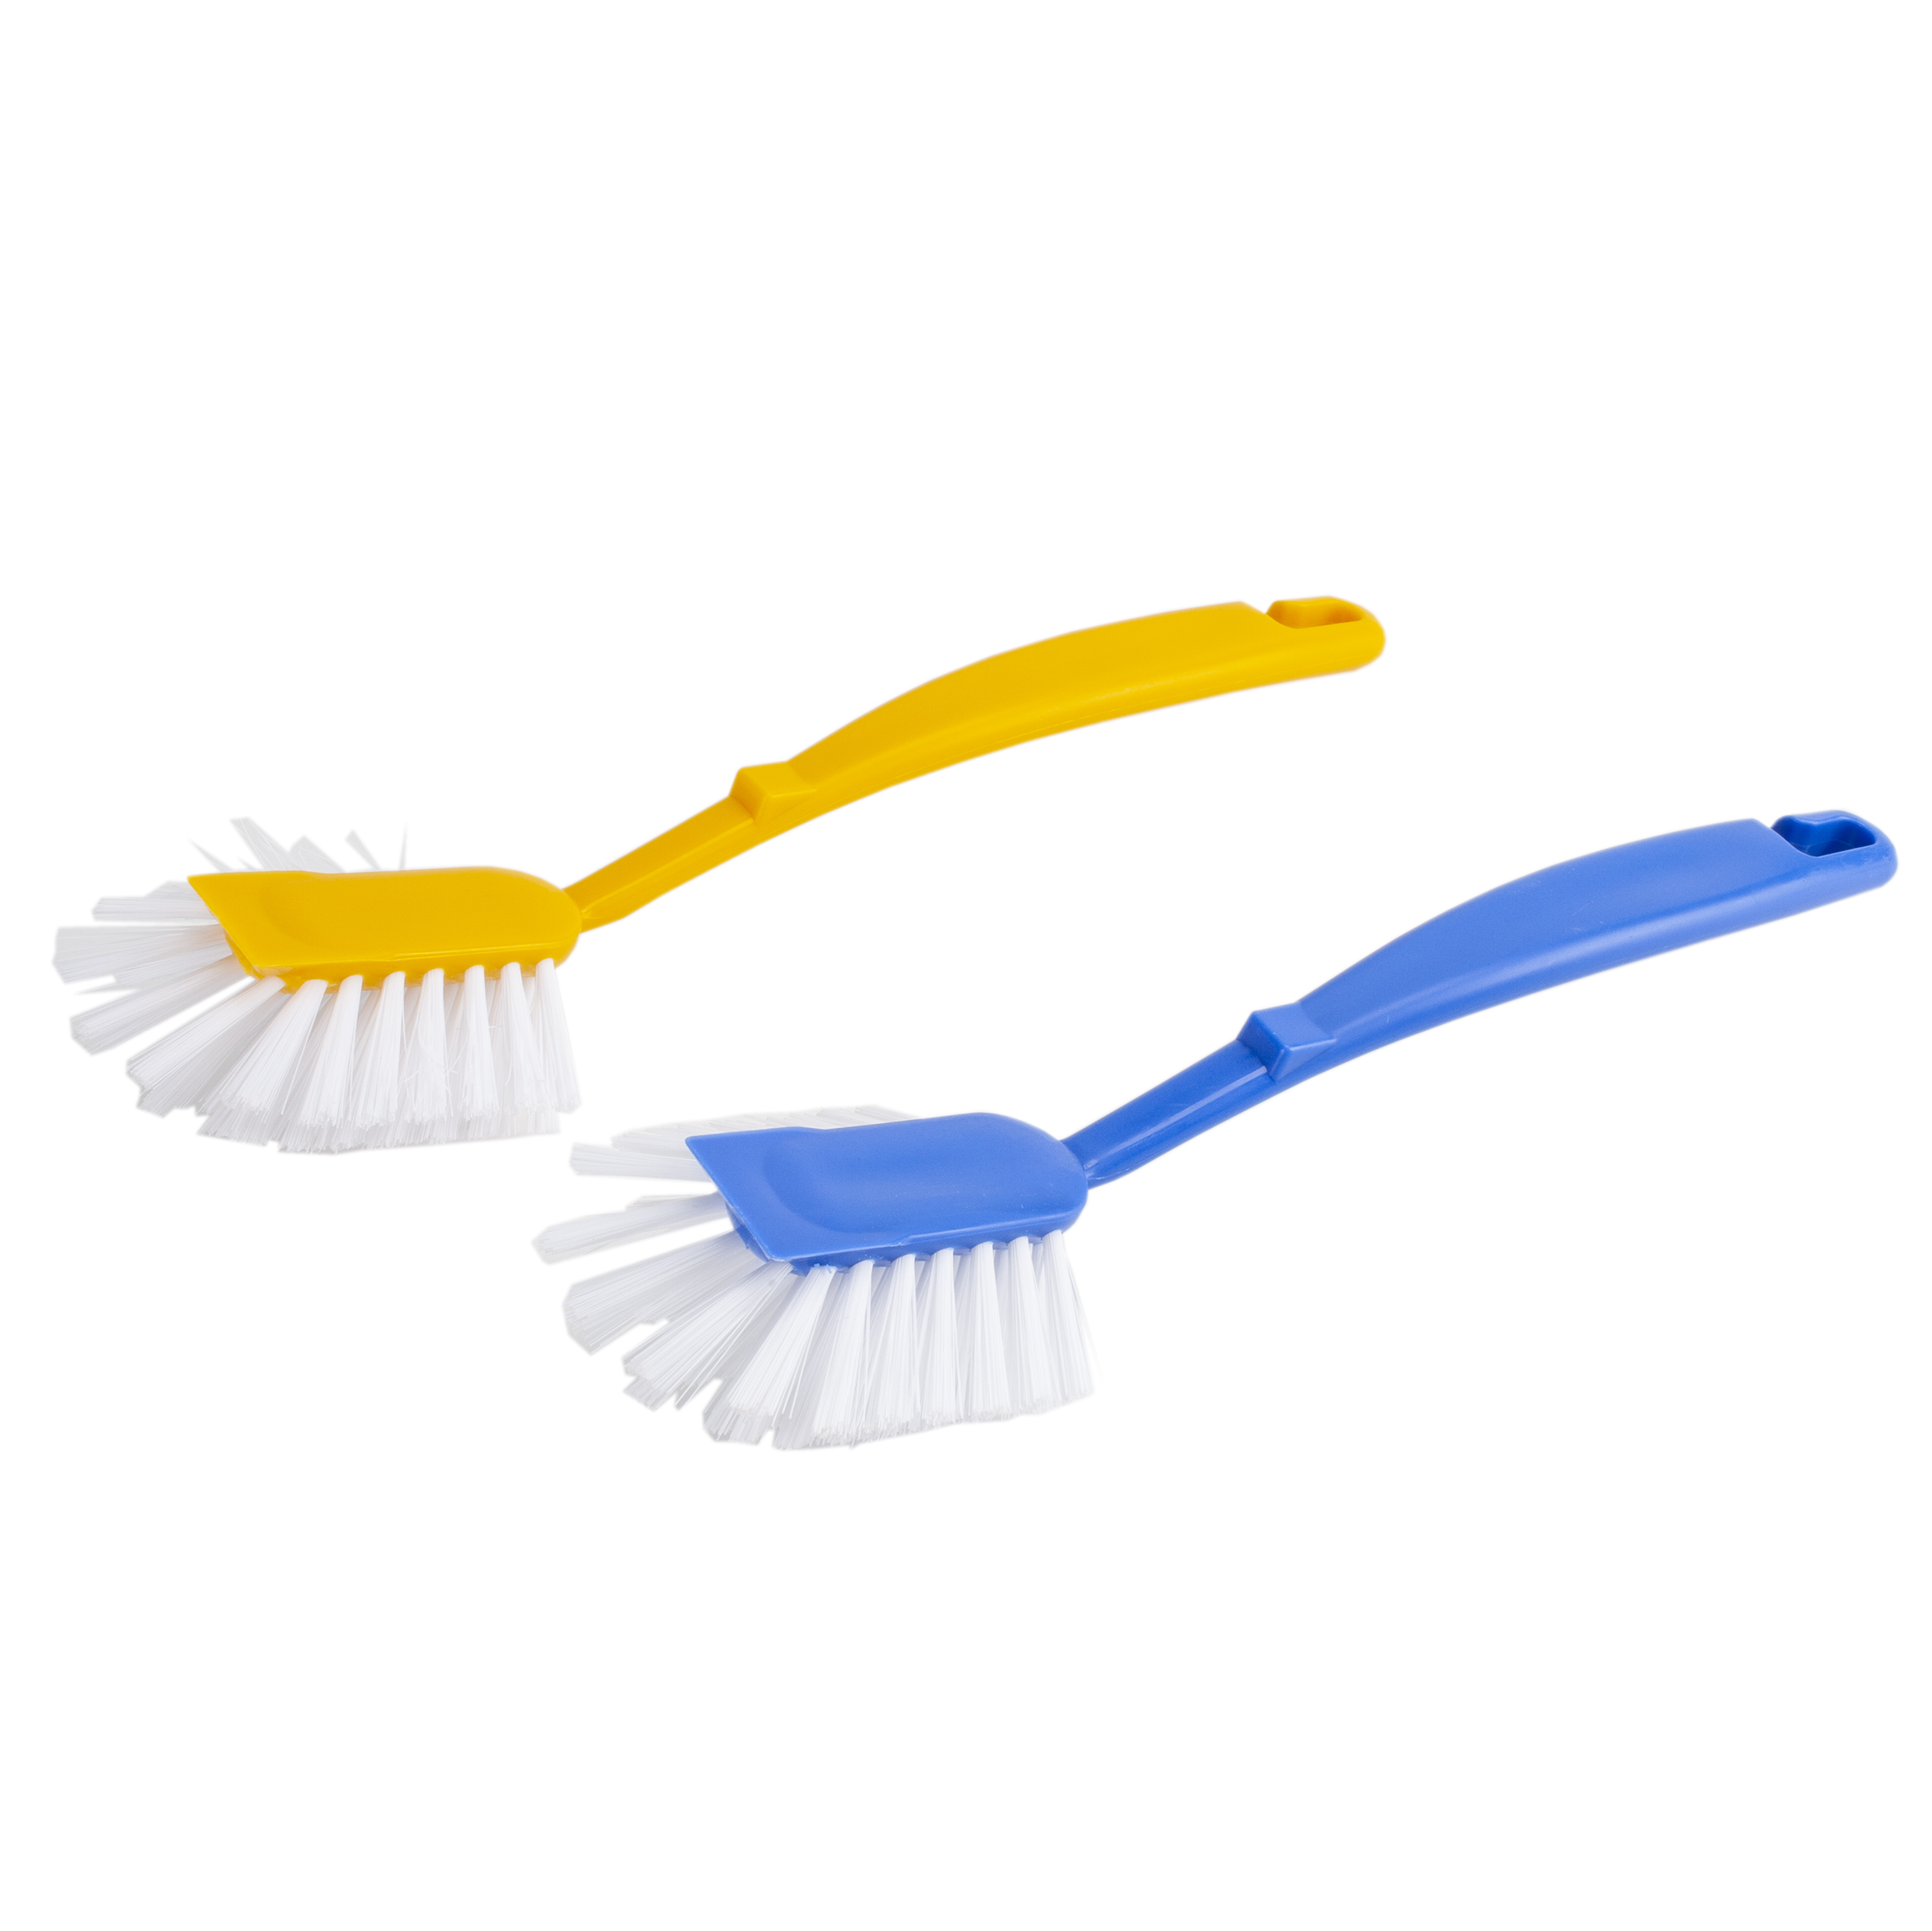 Dish Cleaning Brush & Kitchen Cleaning Brush